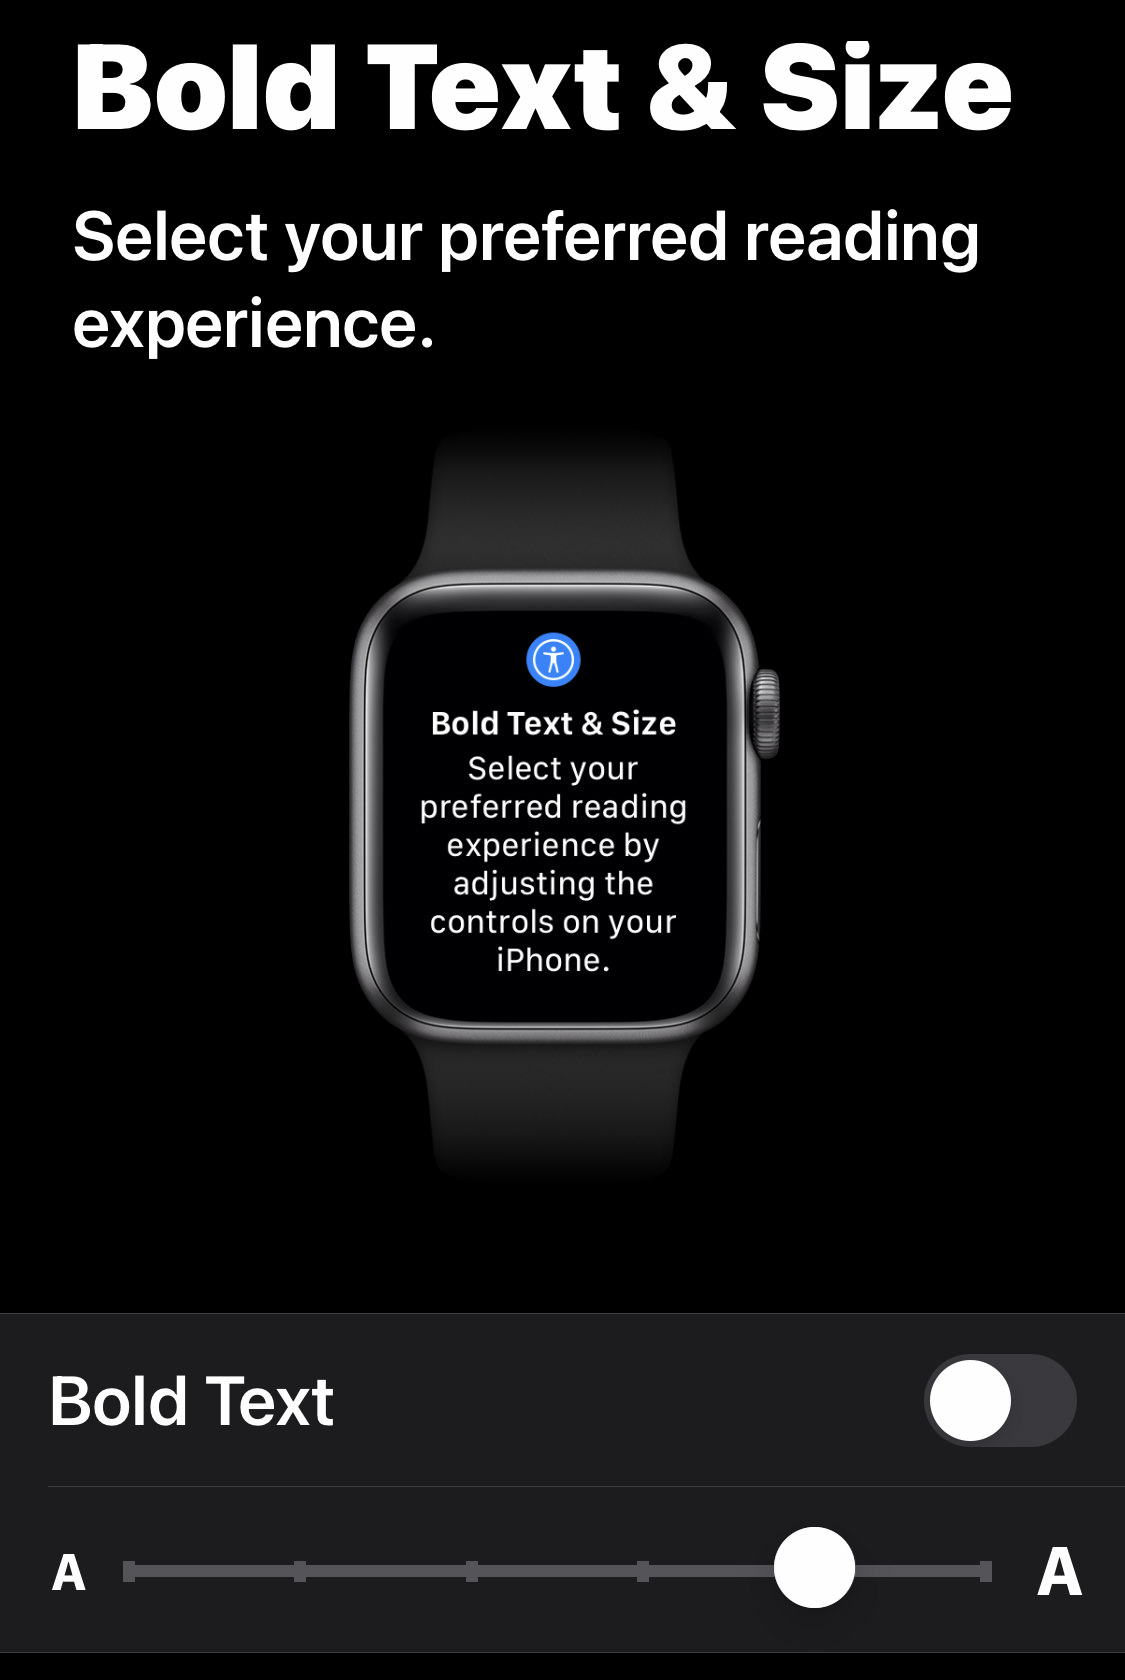 The iPhone Watch app to set the text size on your watch.